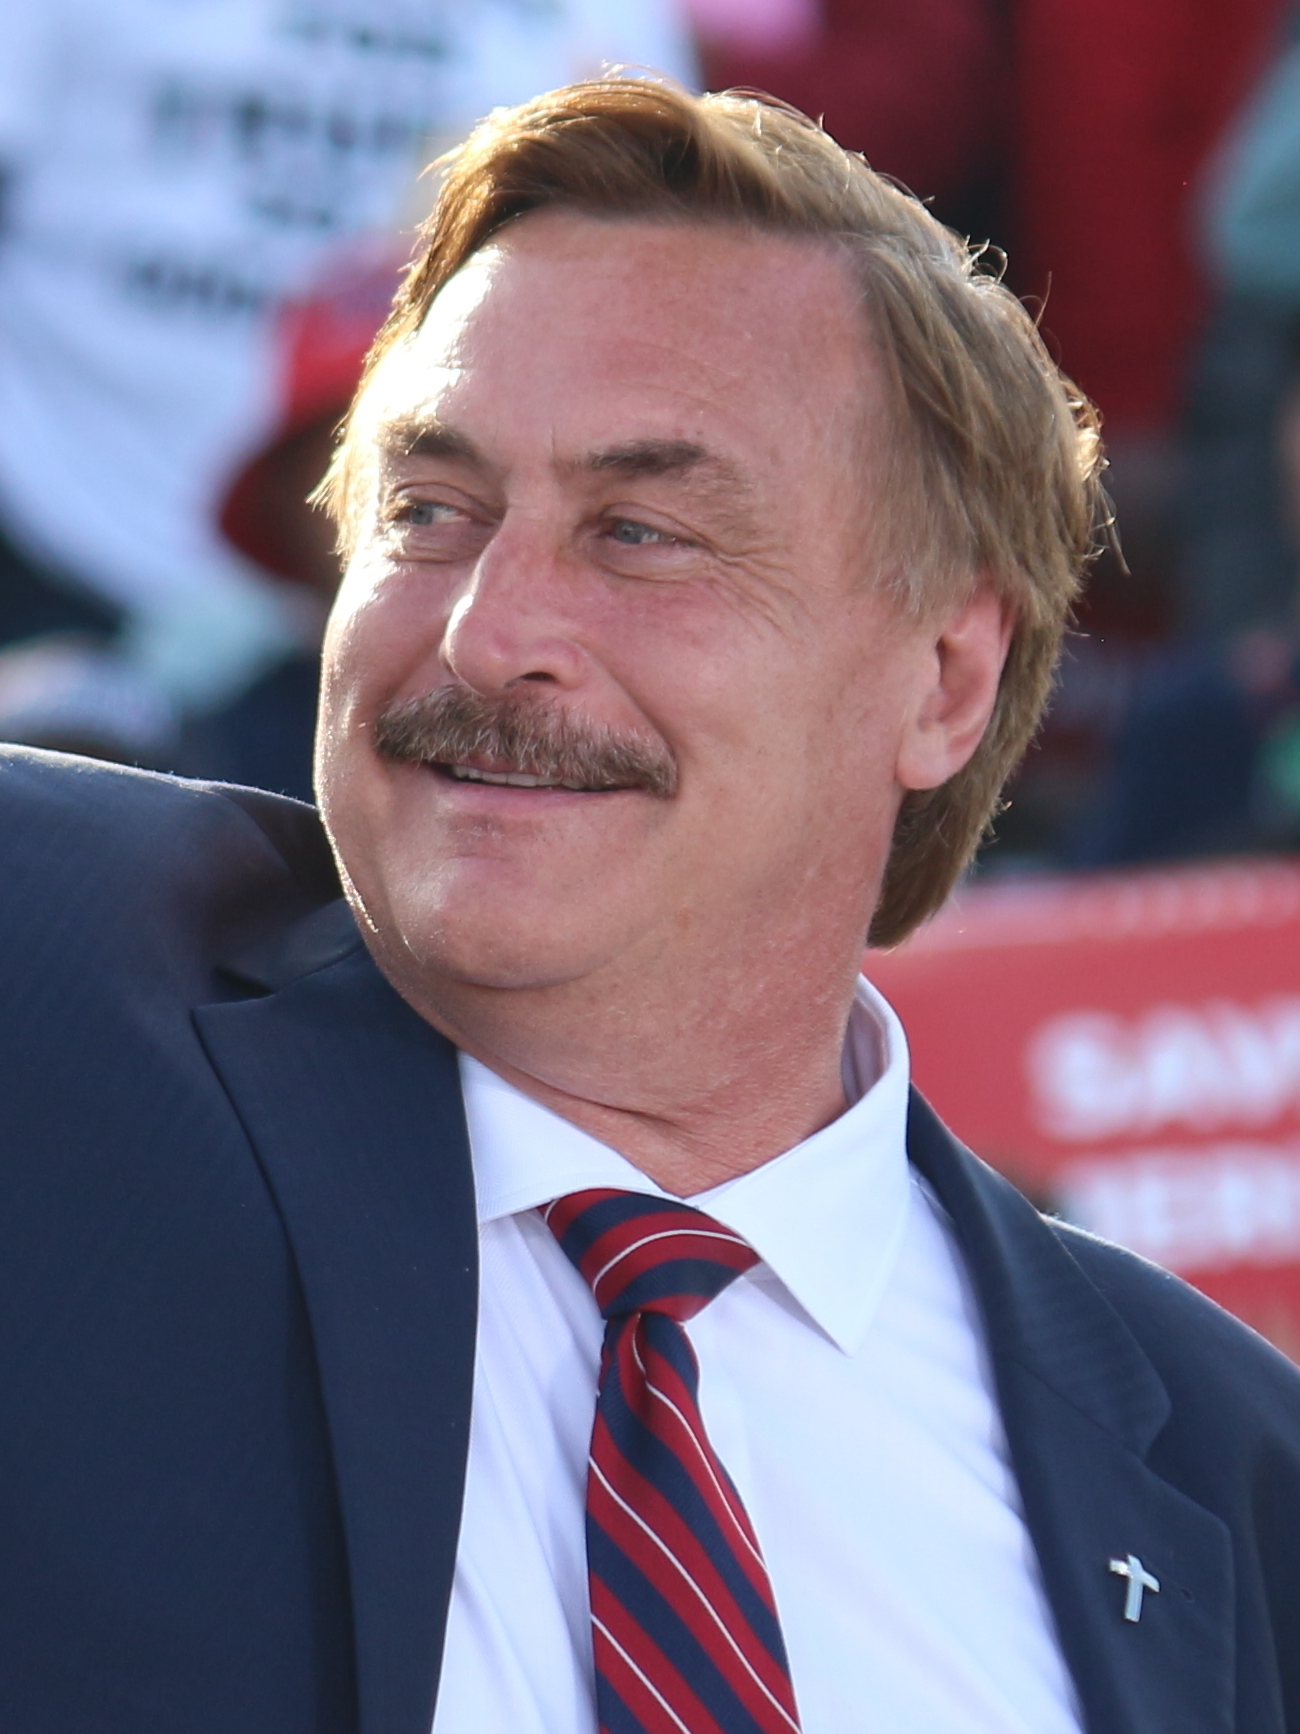 High School Guys Porn - Mike Lindell - Wikipedia